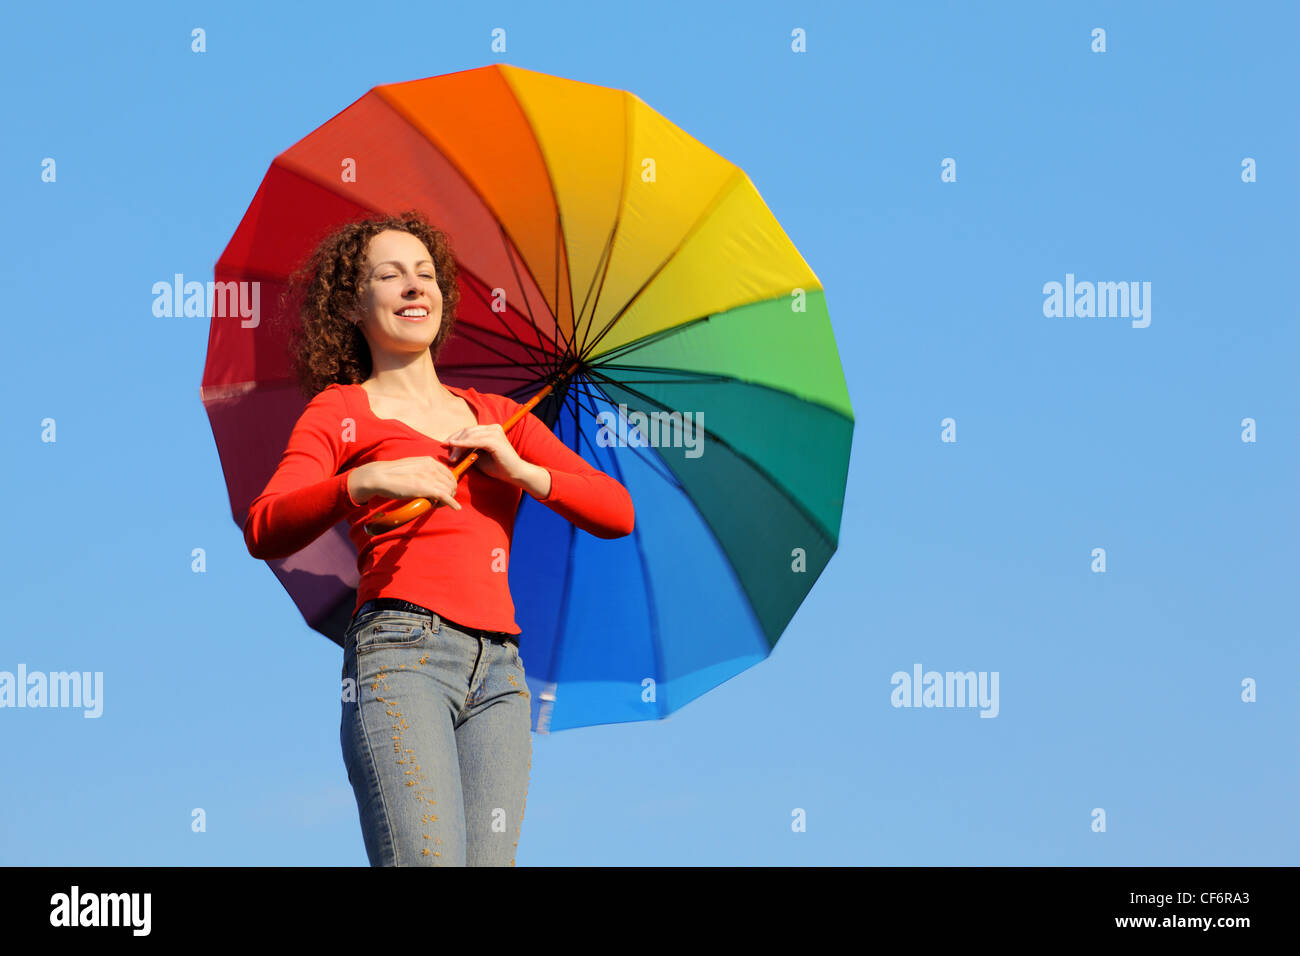 Girl with eyes closed because of glare of sun stands against blue sky and holding colored umbrella Stock Photo